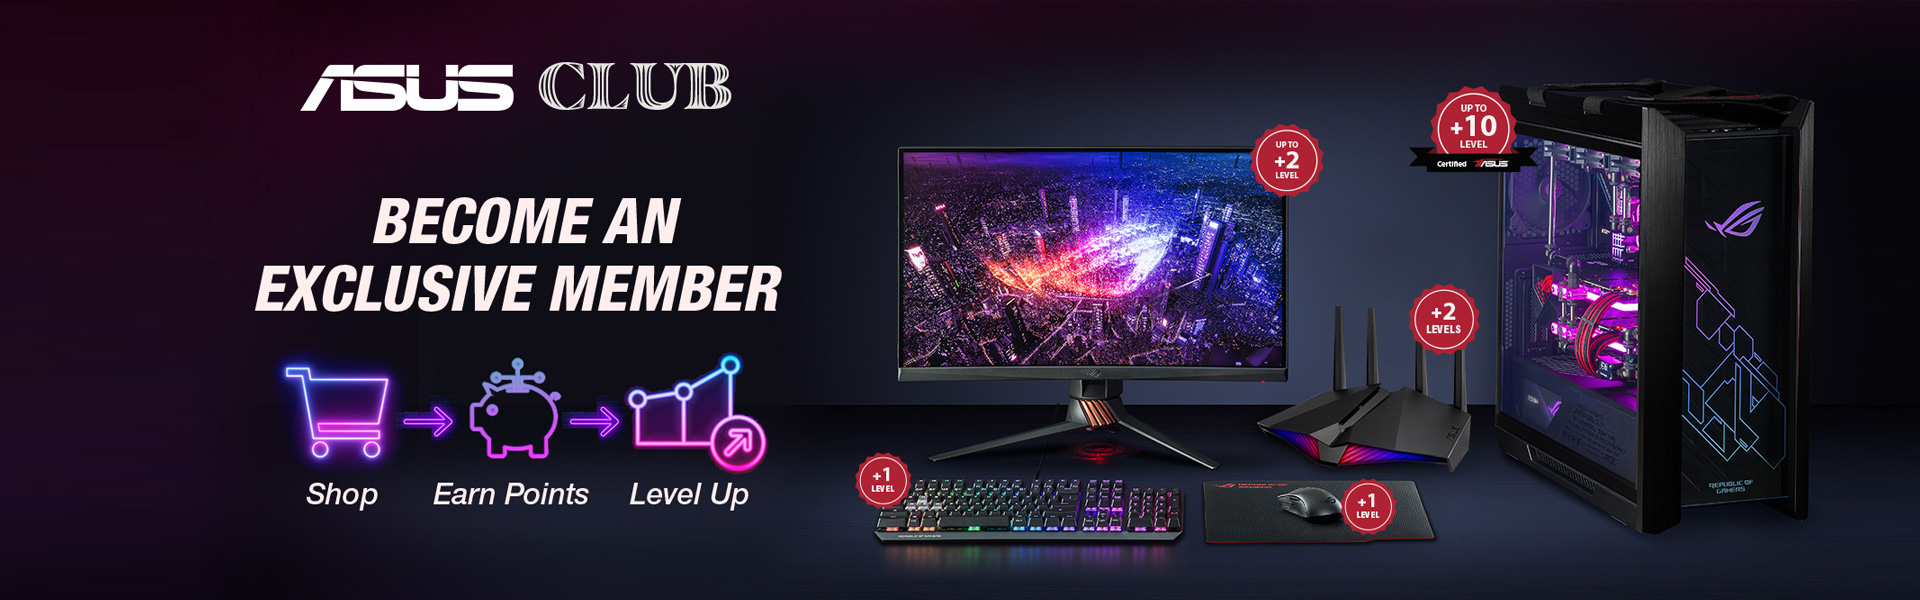 REGISTER YOUR ASUS PRODUCTS AND LEVEL UP